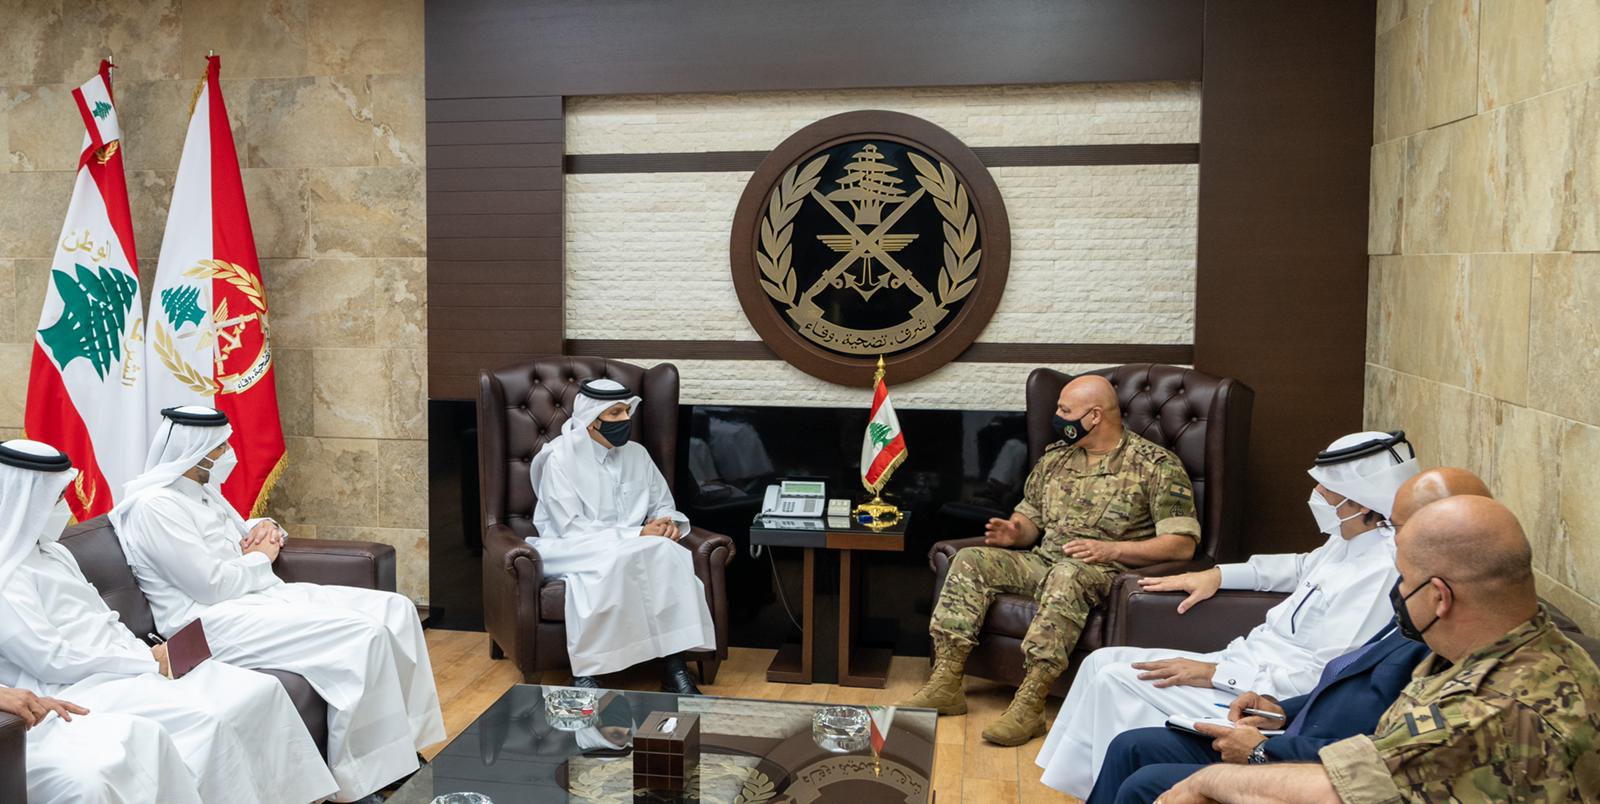 Deputy Prime Minister and Minister of Foreign Affairs Meets Lebanese Army Commander